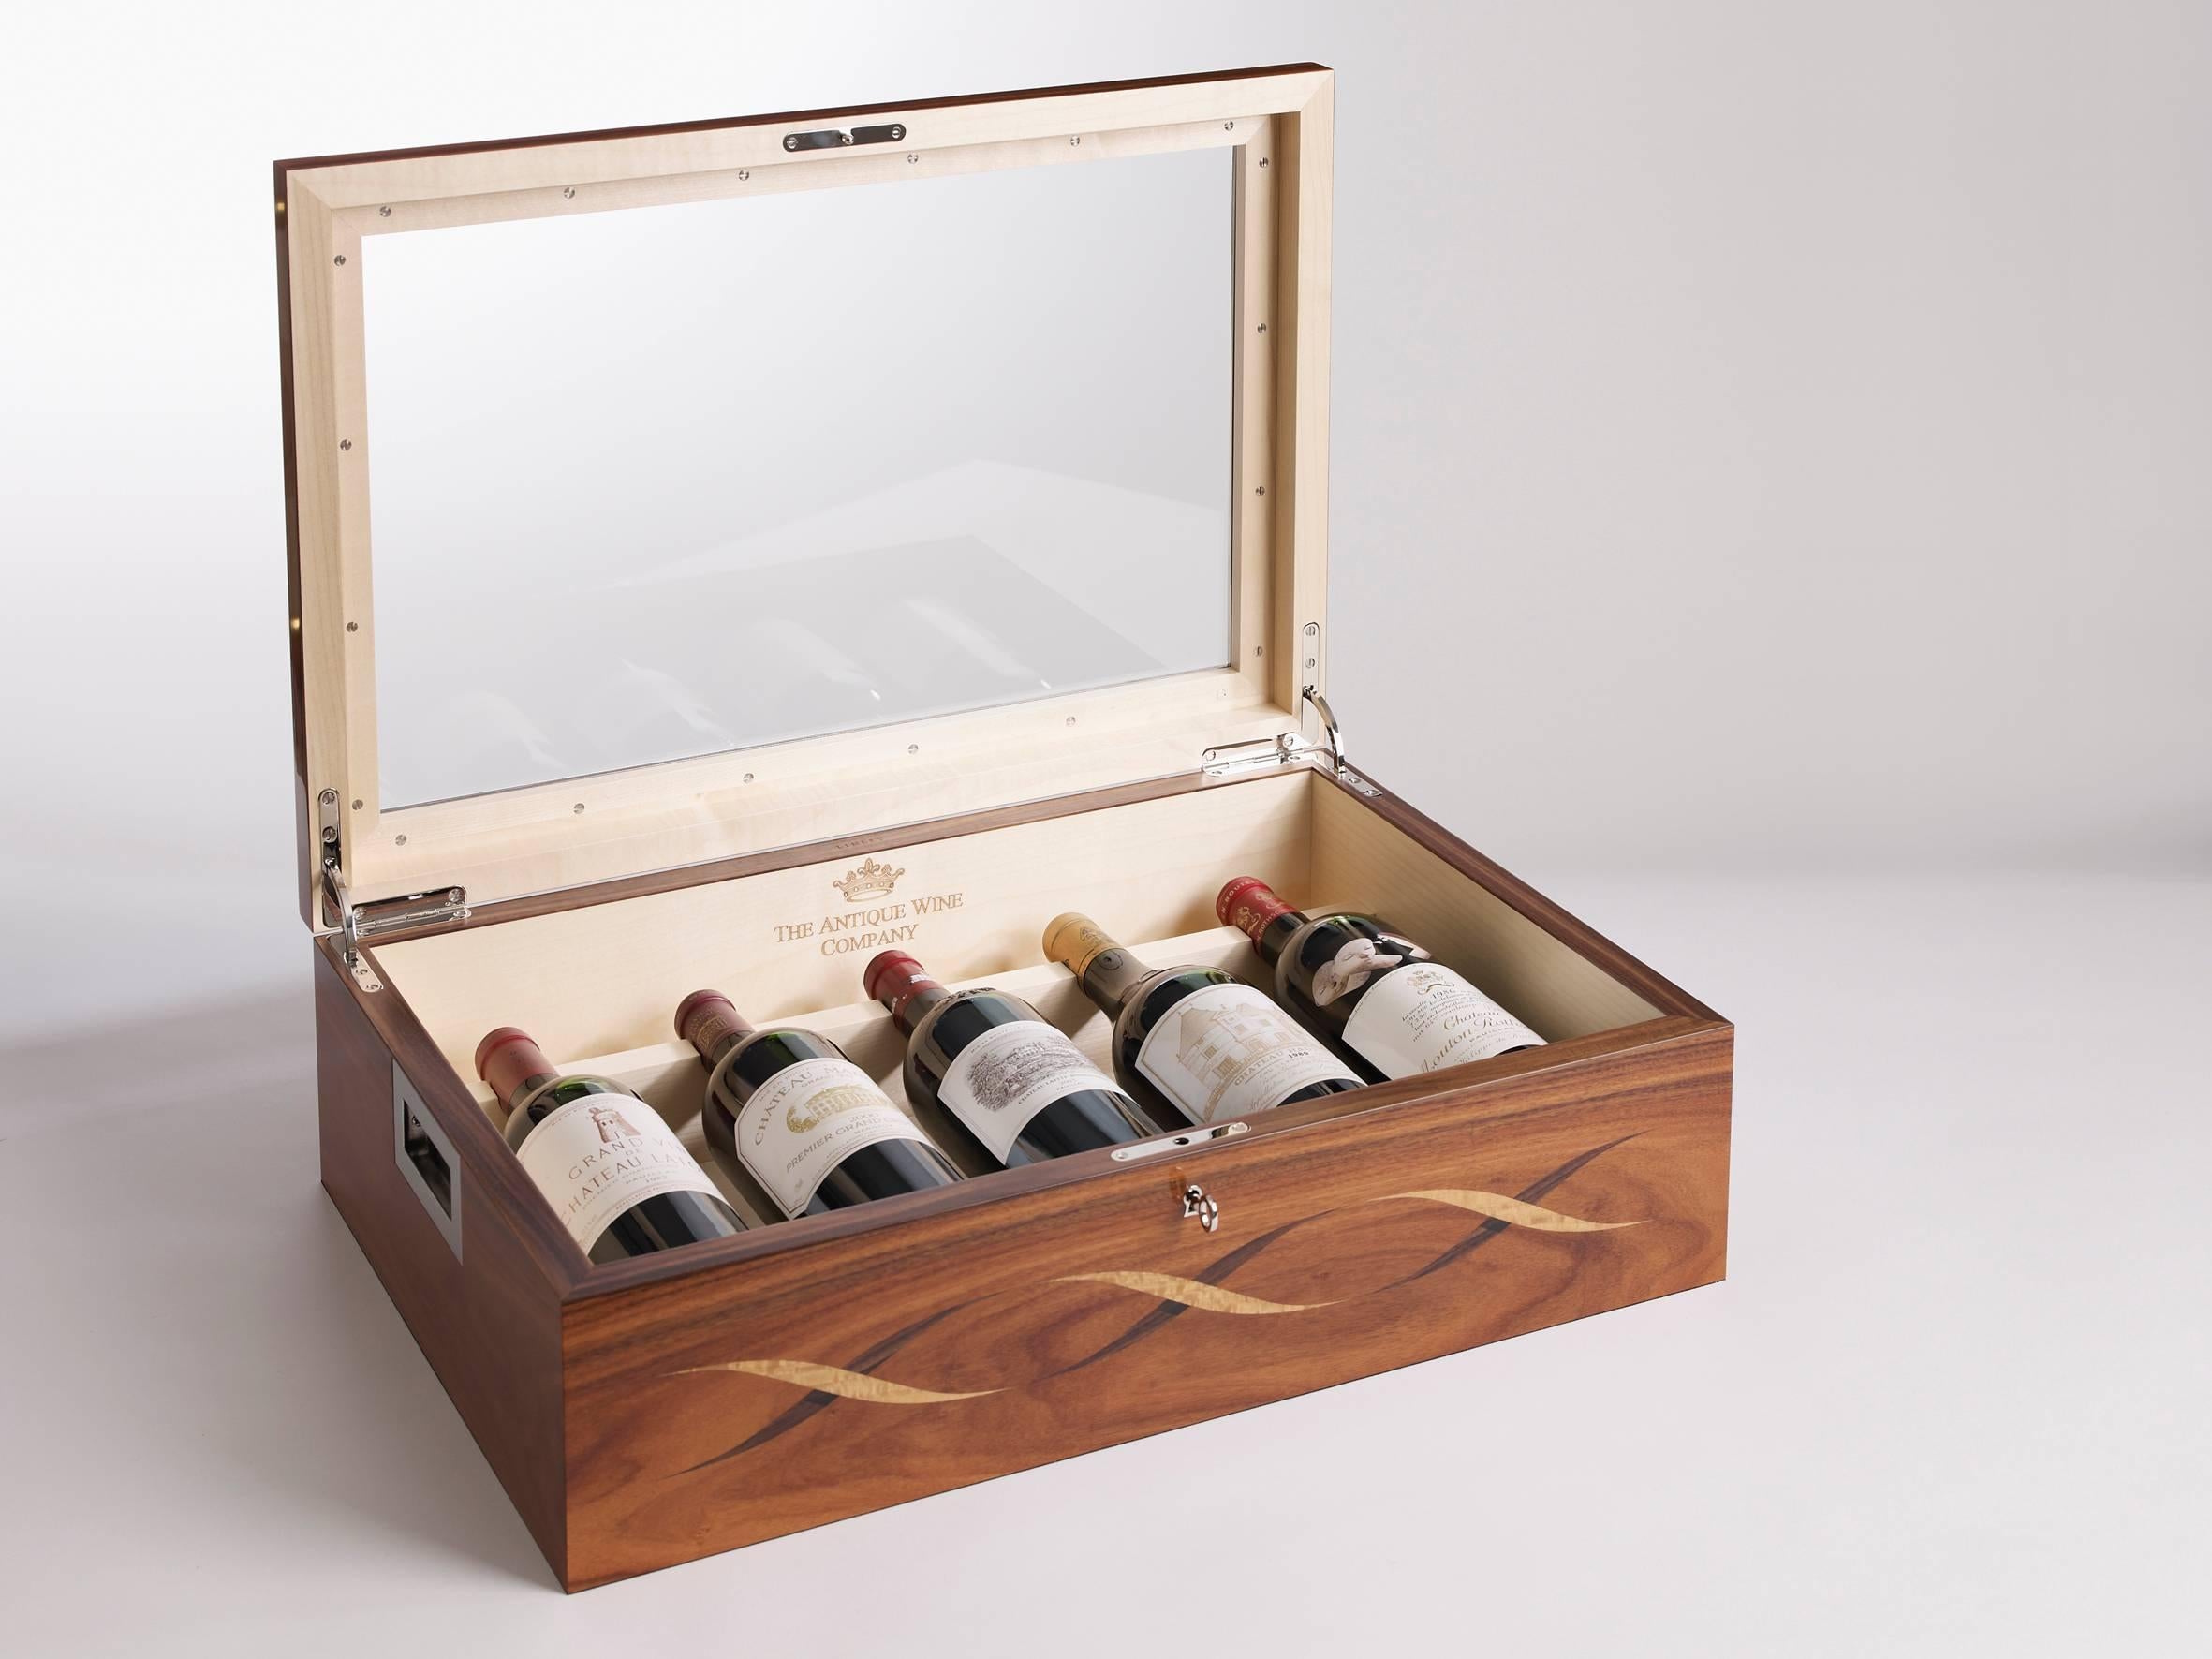 The predominant feature of the wine box is the intertwined twin strands of the double helix, or the unit cell of DNA in marquetry inlay. This motif characterizes the iconic Helix furniture collection and has been applied using the technique of